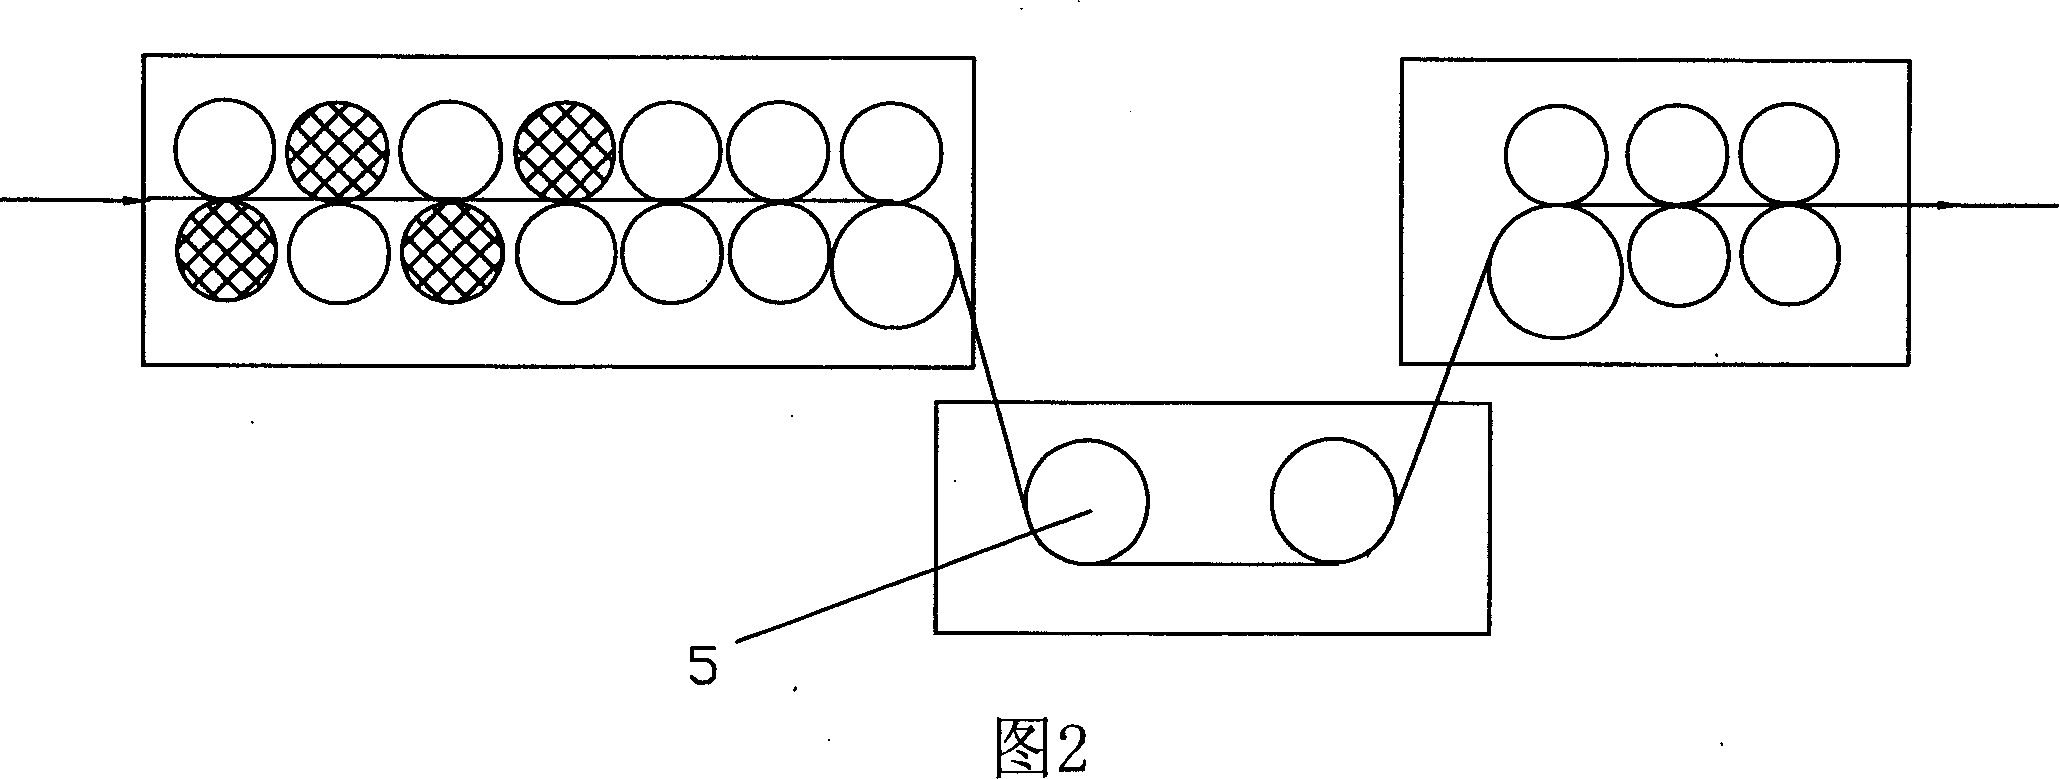 Method and apparatus for preventing band-steel electrolyzing cleaner running from offset and coiling leakage